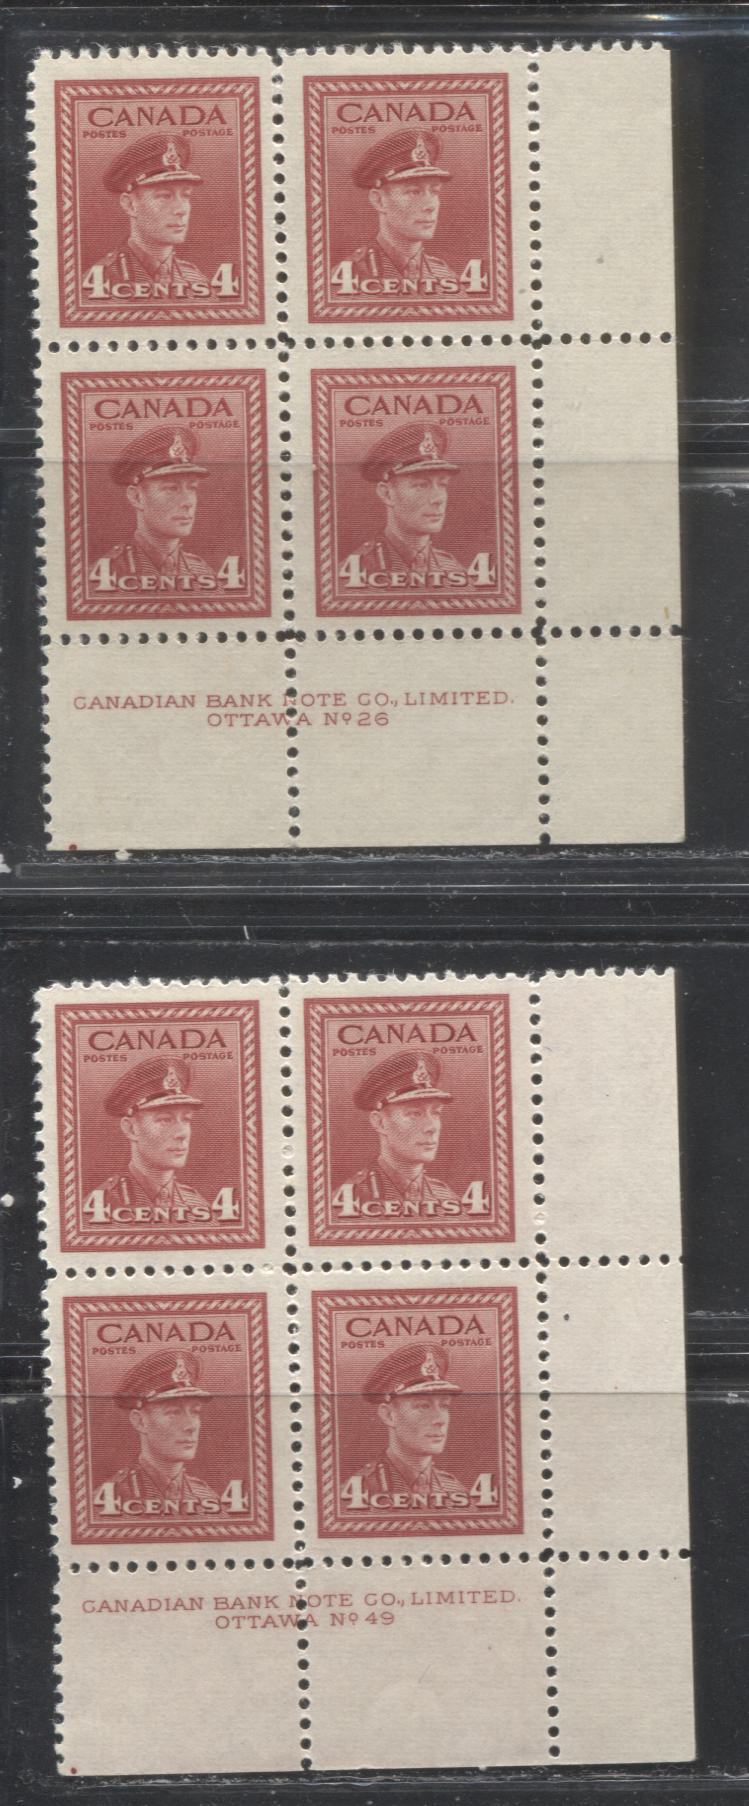 Lot 51 Canada #254 4c Carmine-Red King George VI  1942-1949 War Issue, VFOG Plate 26 & 49 Lower Right Blocks of 4 Plate Dot at LL